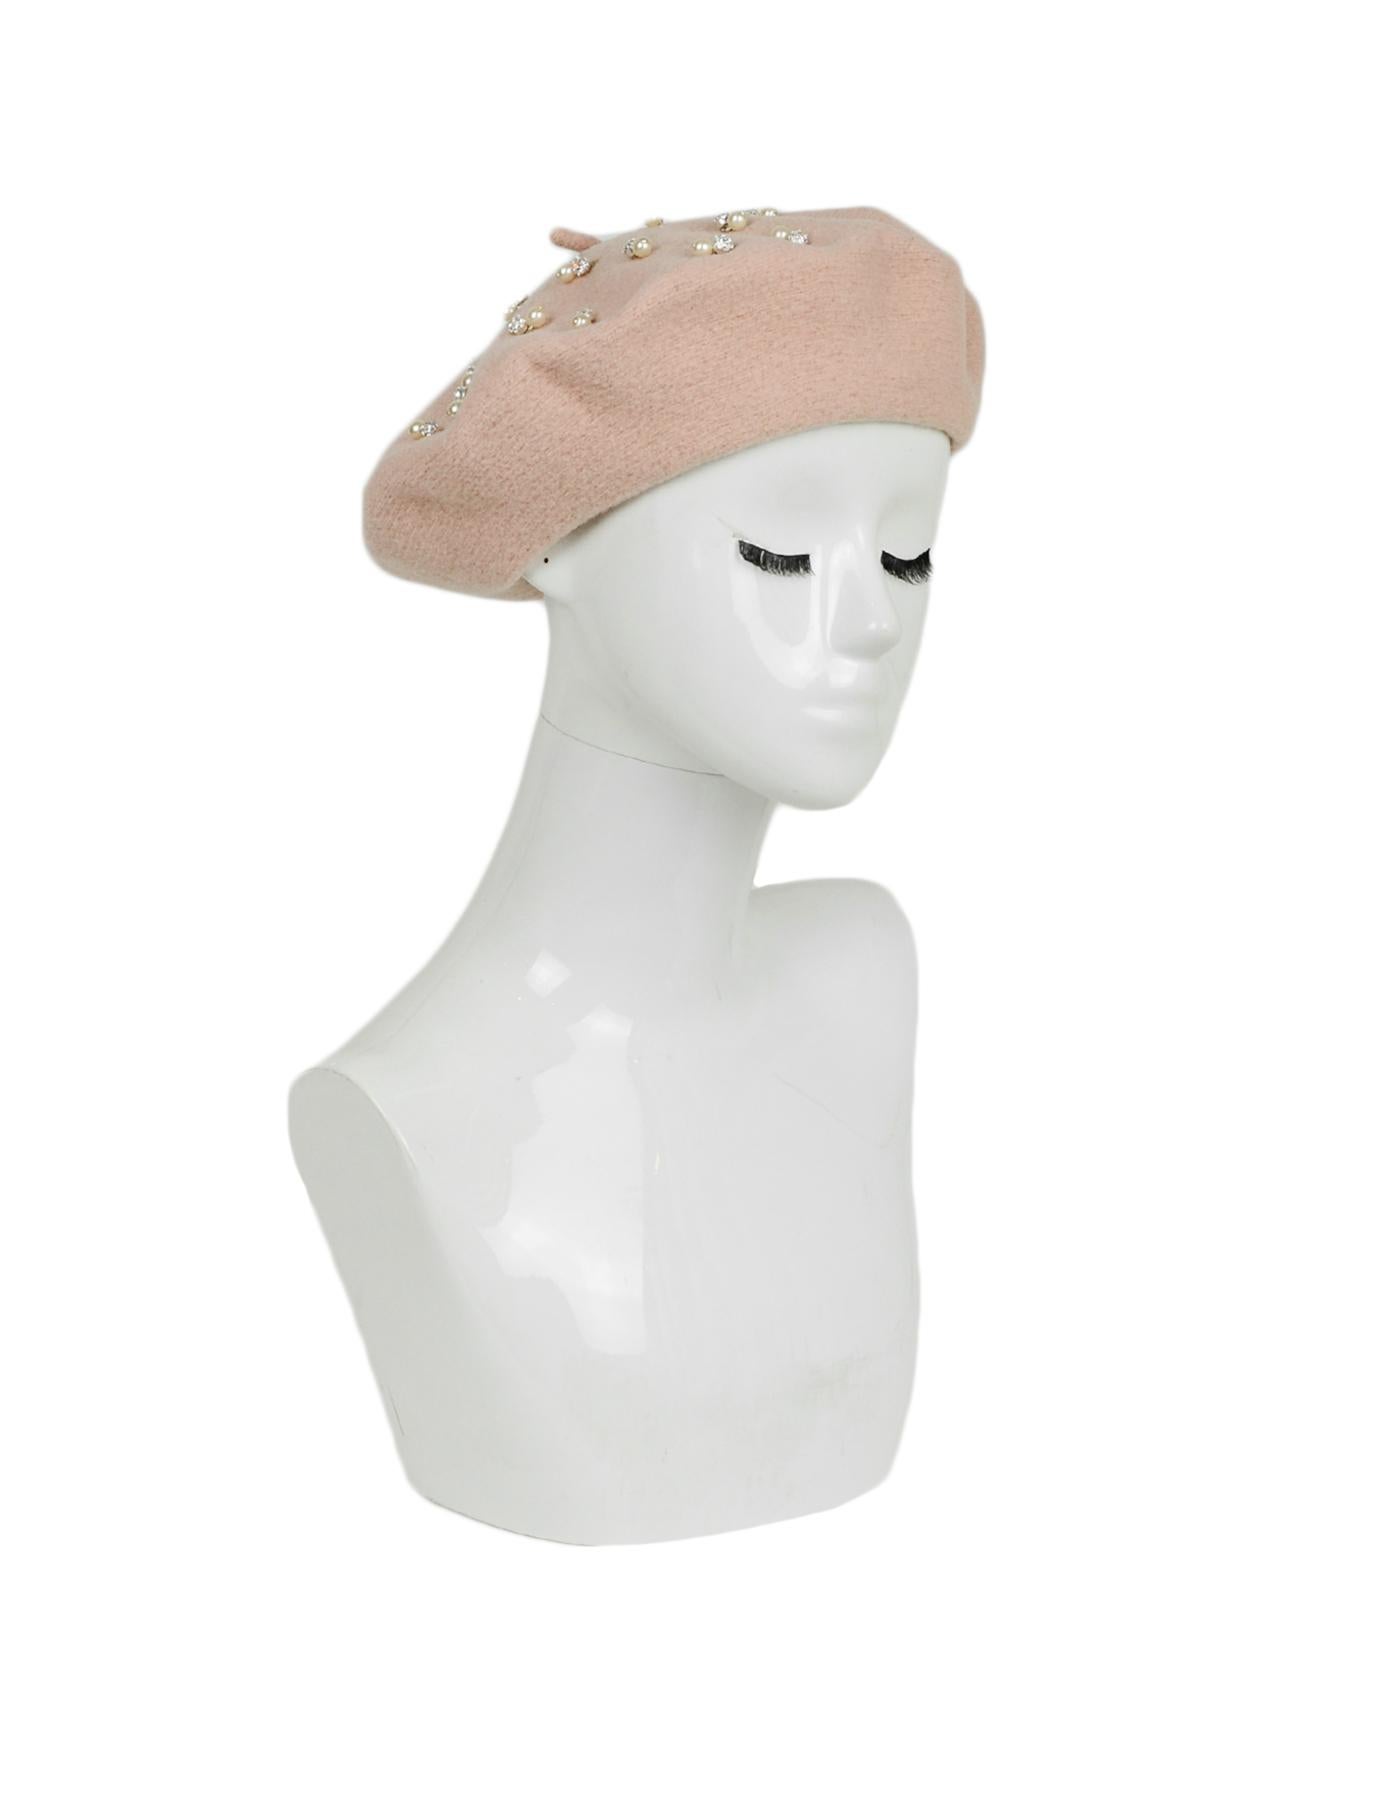 Benoit Missolin Blush Pink Beret w/ Faux Pearl & Crystals NWT

Made In: United Kingdom
Color: Pink
Materials: 100% Merino Wool 
Steel, Glass, and Plastic Beads
Opening/Closure: Pull on
Overall Condition: New with tag, NWT
Estimated Retail: $248 +